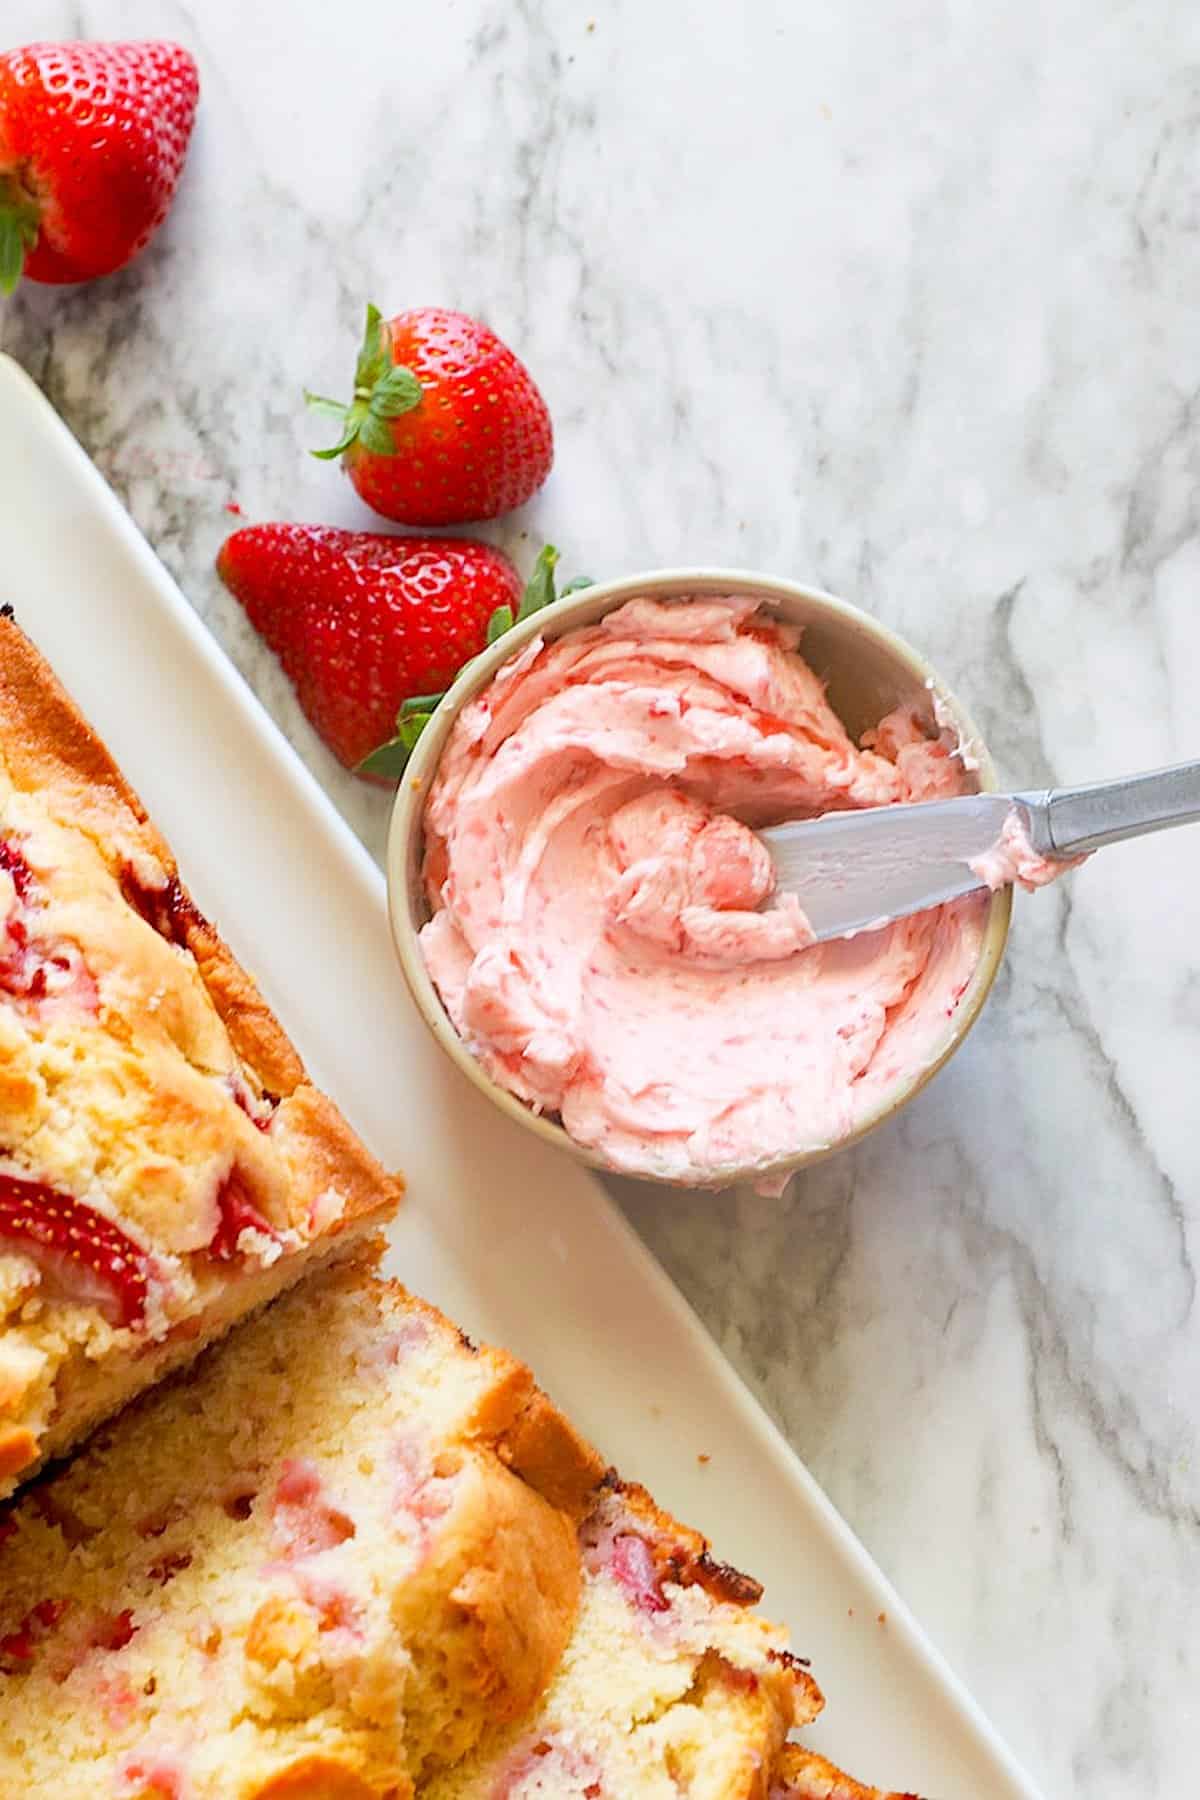 Spreading insanely good strawberry butter on freshly baked bread